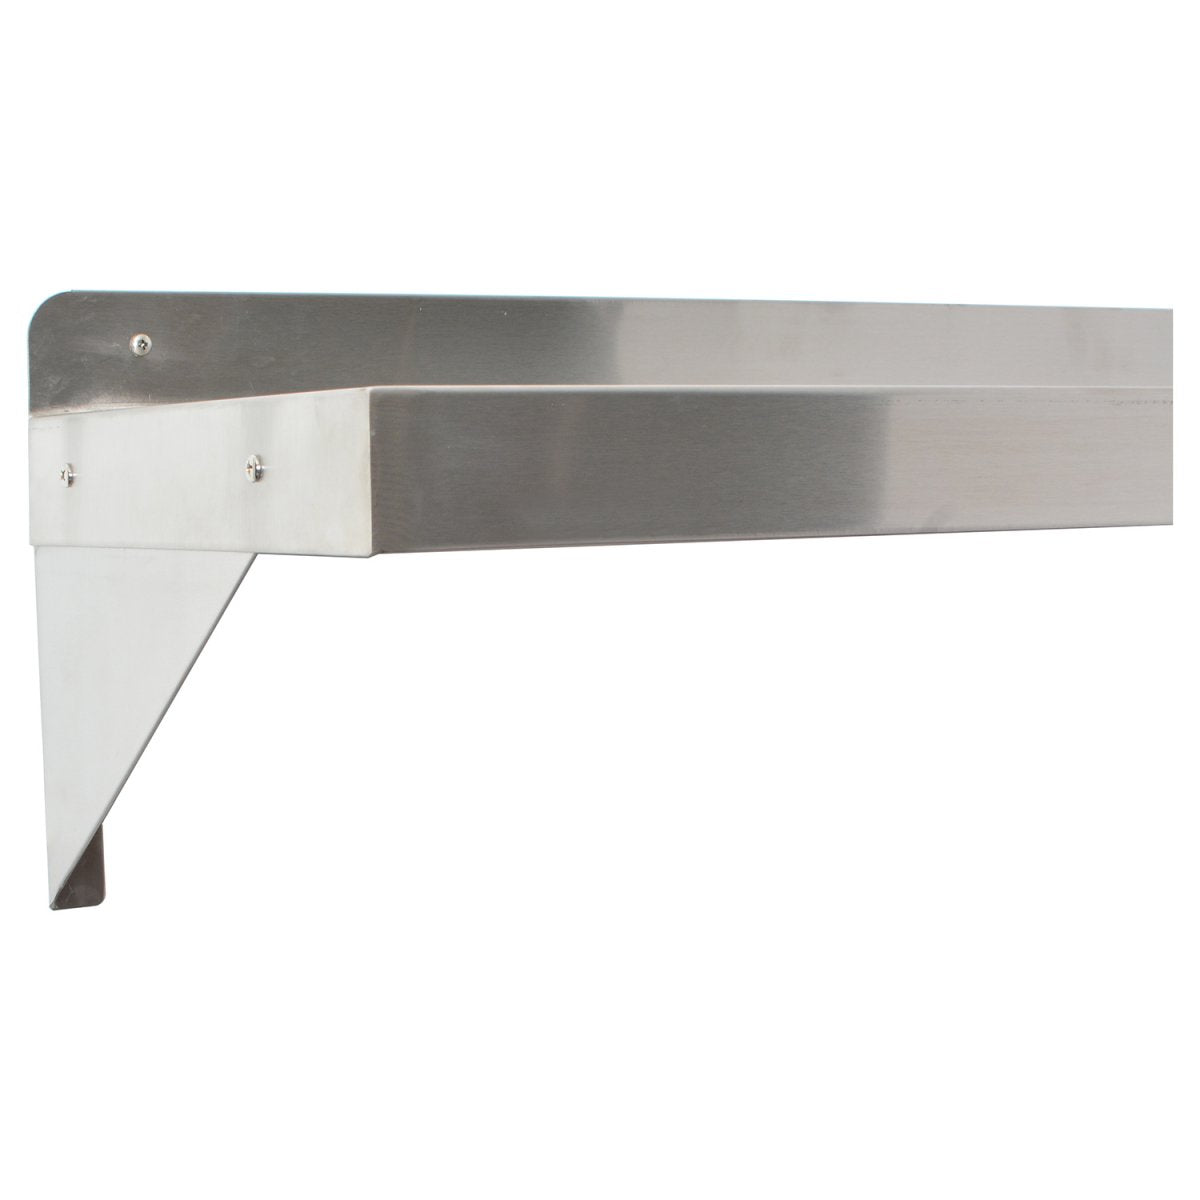 Wall Shelf Stainless steel 600x300x490mm.Product ref:00348.